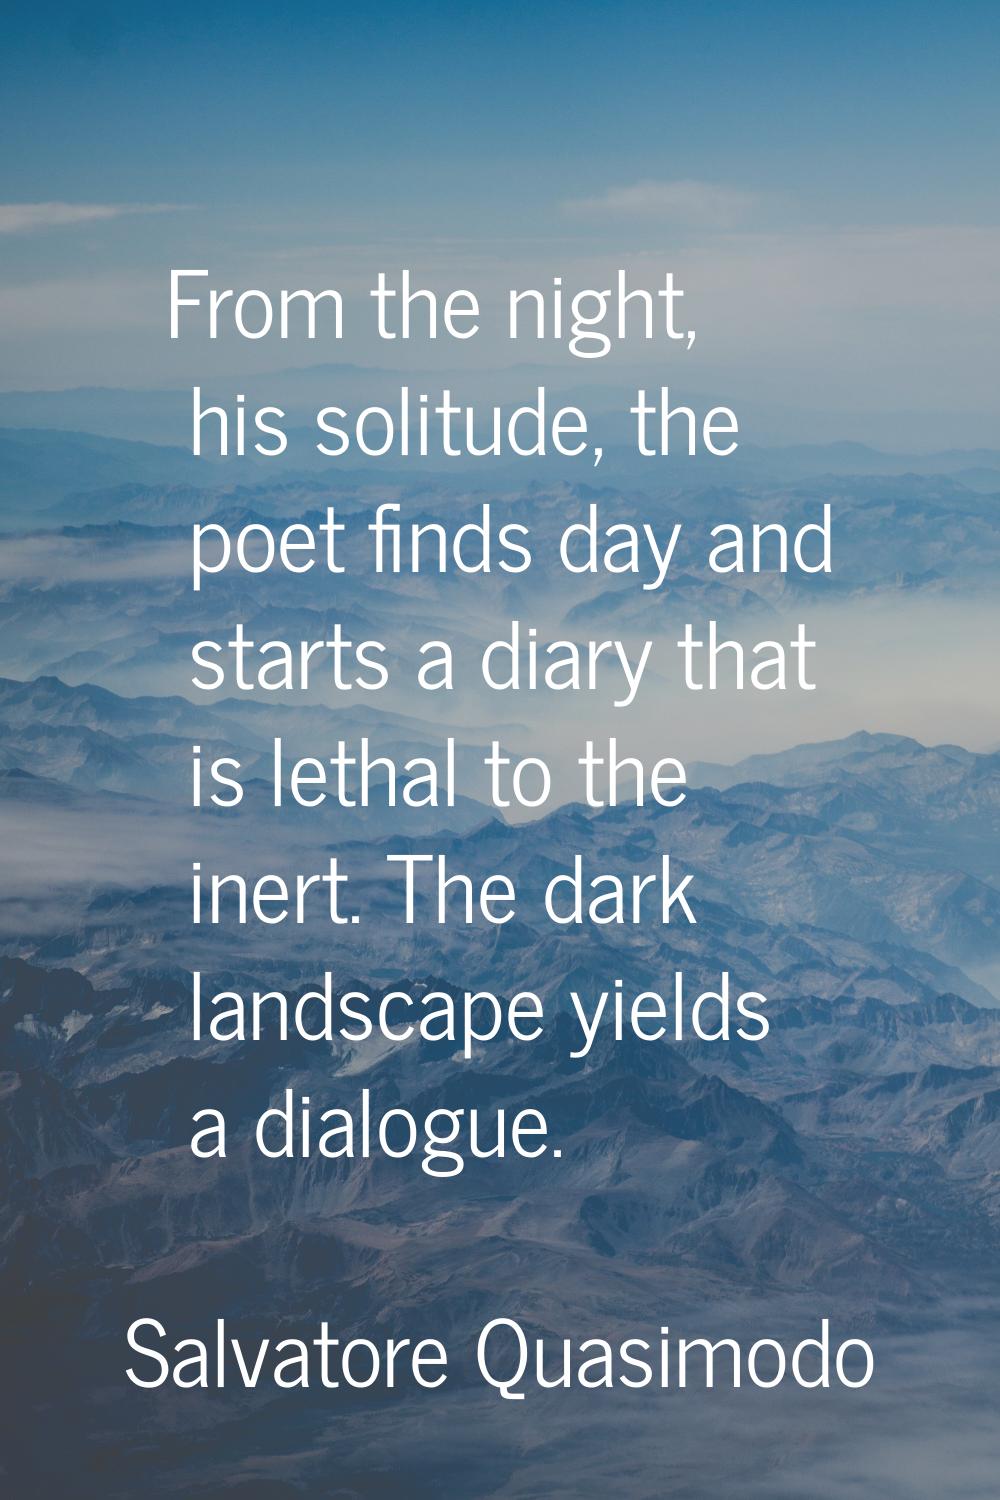 From the night, his solitude, the poet finds day and starts a diary that is lethal to the inert. Th